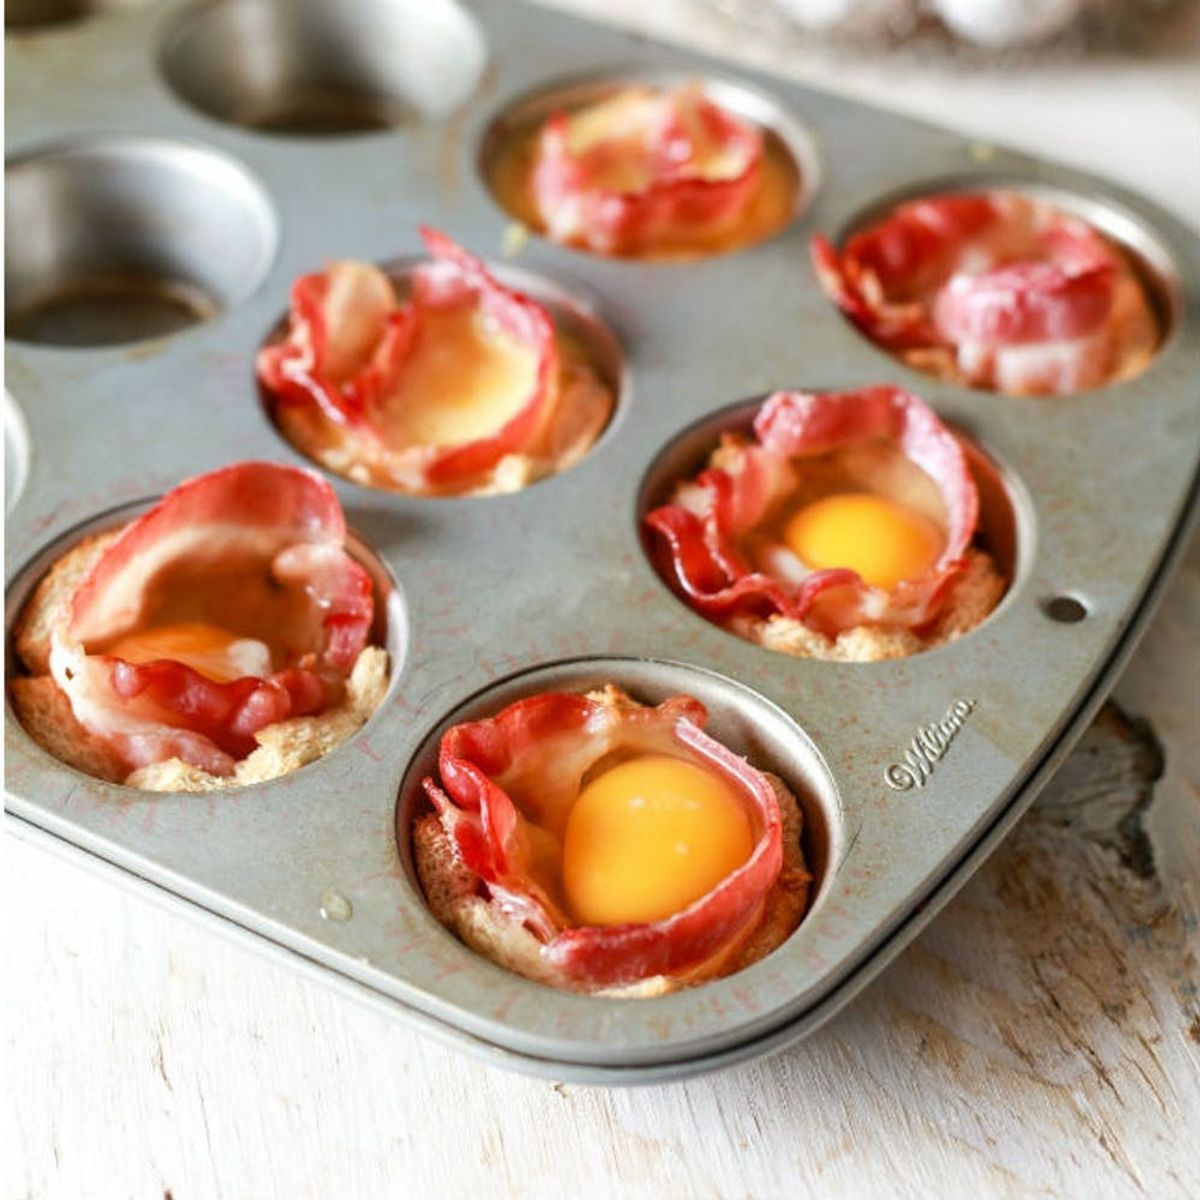 19 Make-Ahead Breakfast Recipes You Can Make in a Muffin Pan